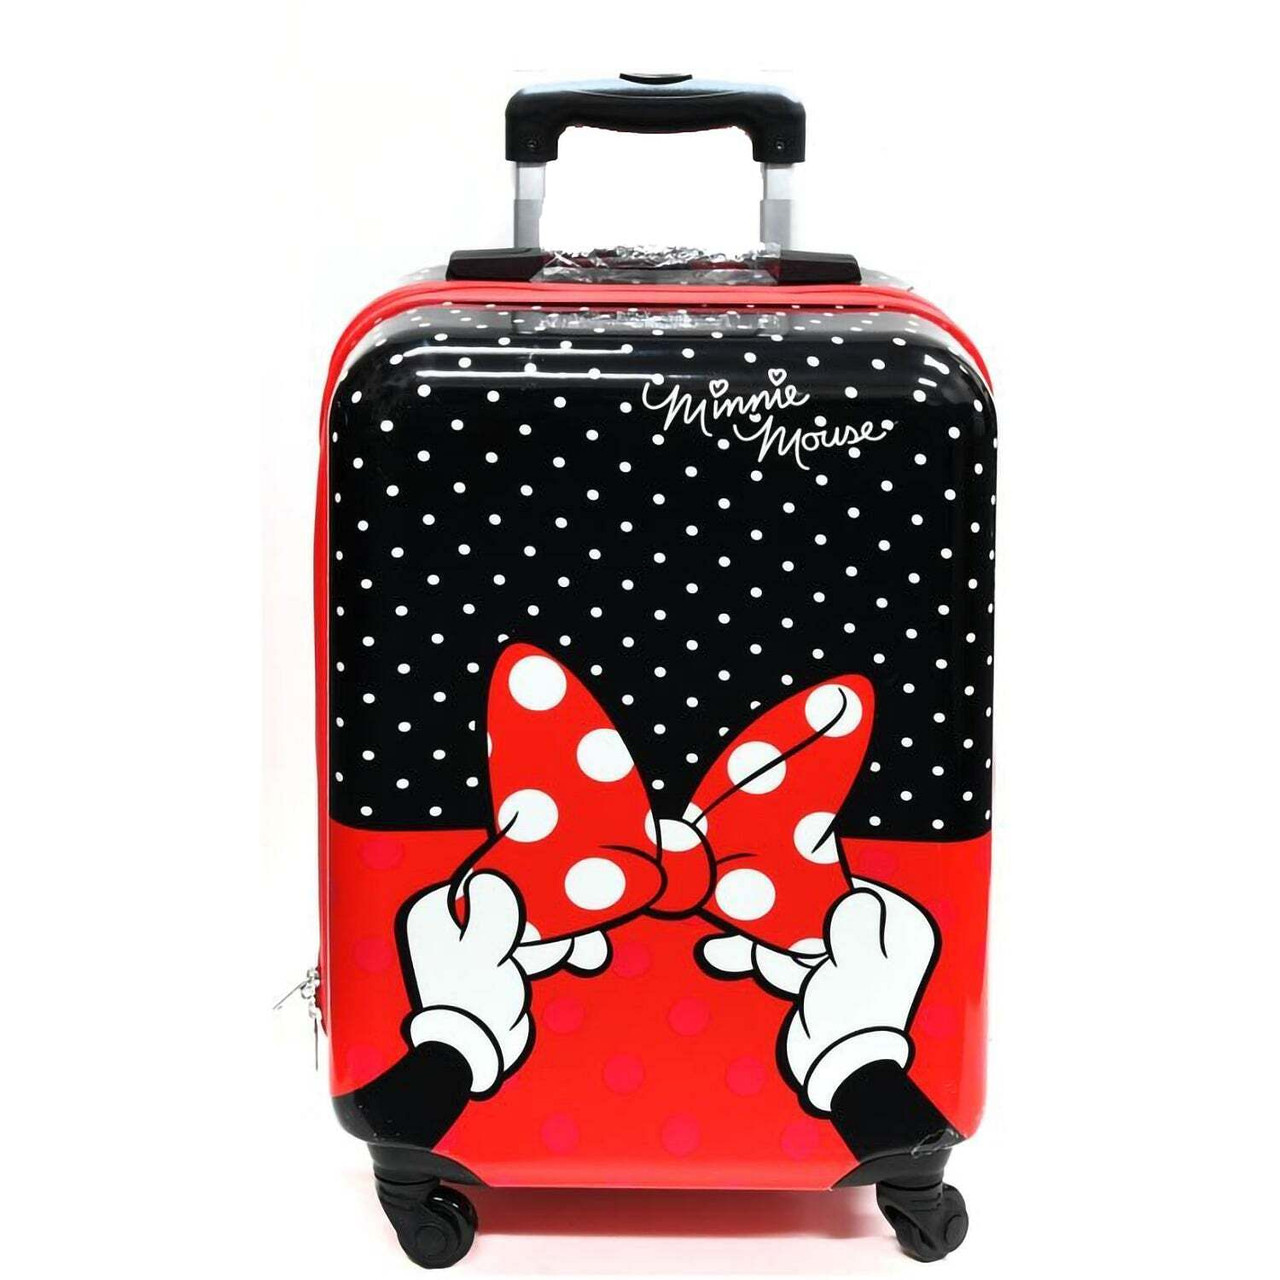 Minnie Mouse 18 Inch Hardside Spinner Luggage